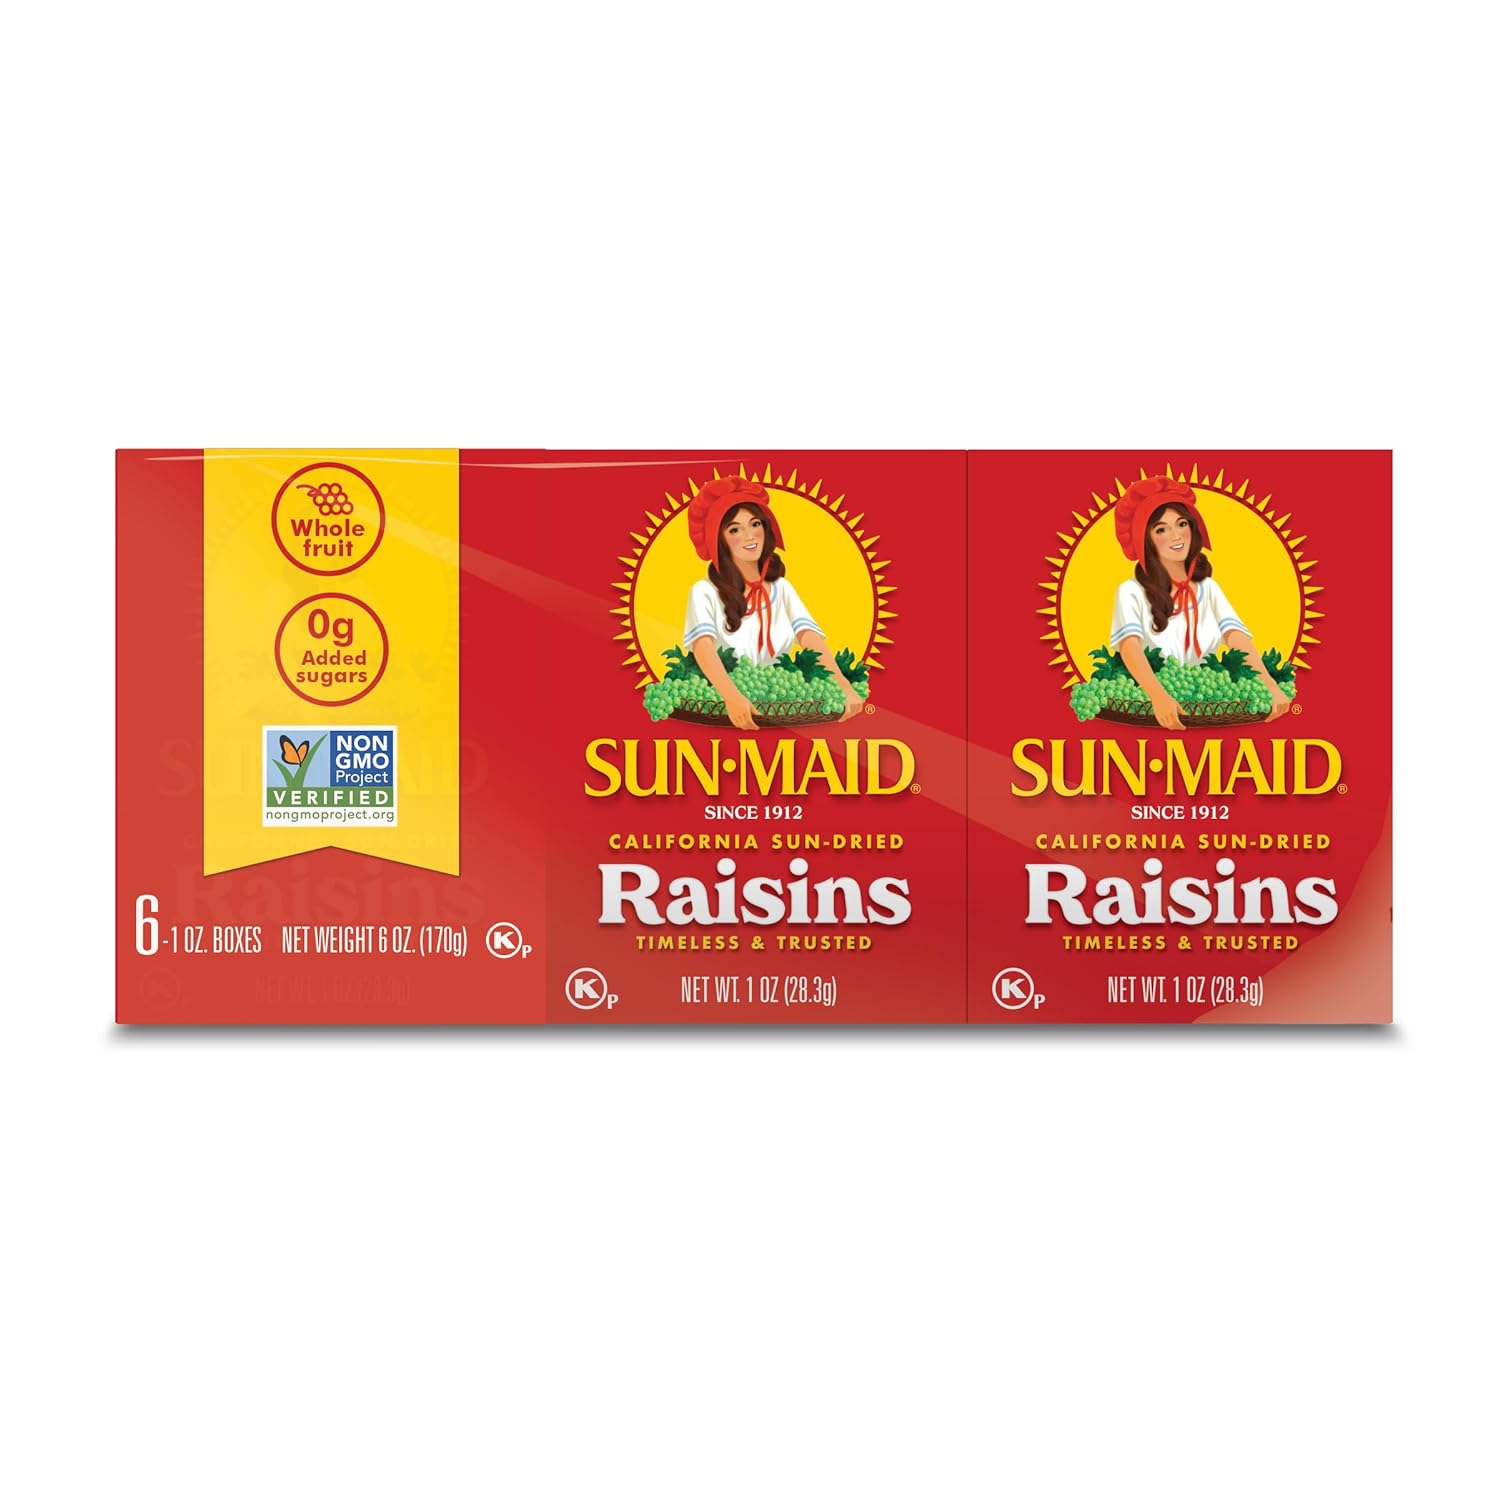 Sun-Maid California Sun-Dried Raisins - (6 Pack) 1 oz Snack-Size Box - Dried Fruit Snack for Lunches, Snacks, and Natural Sweeteners